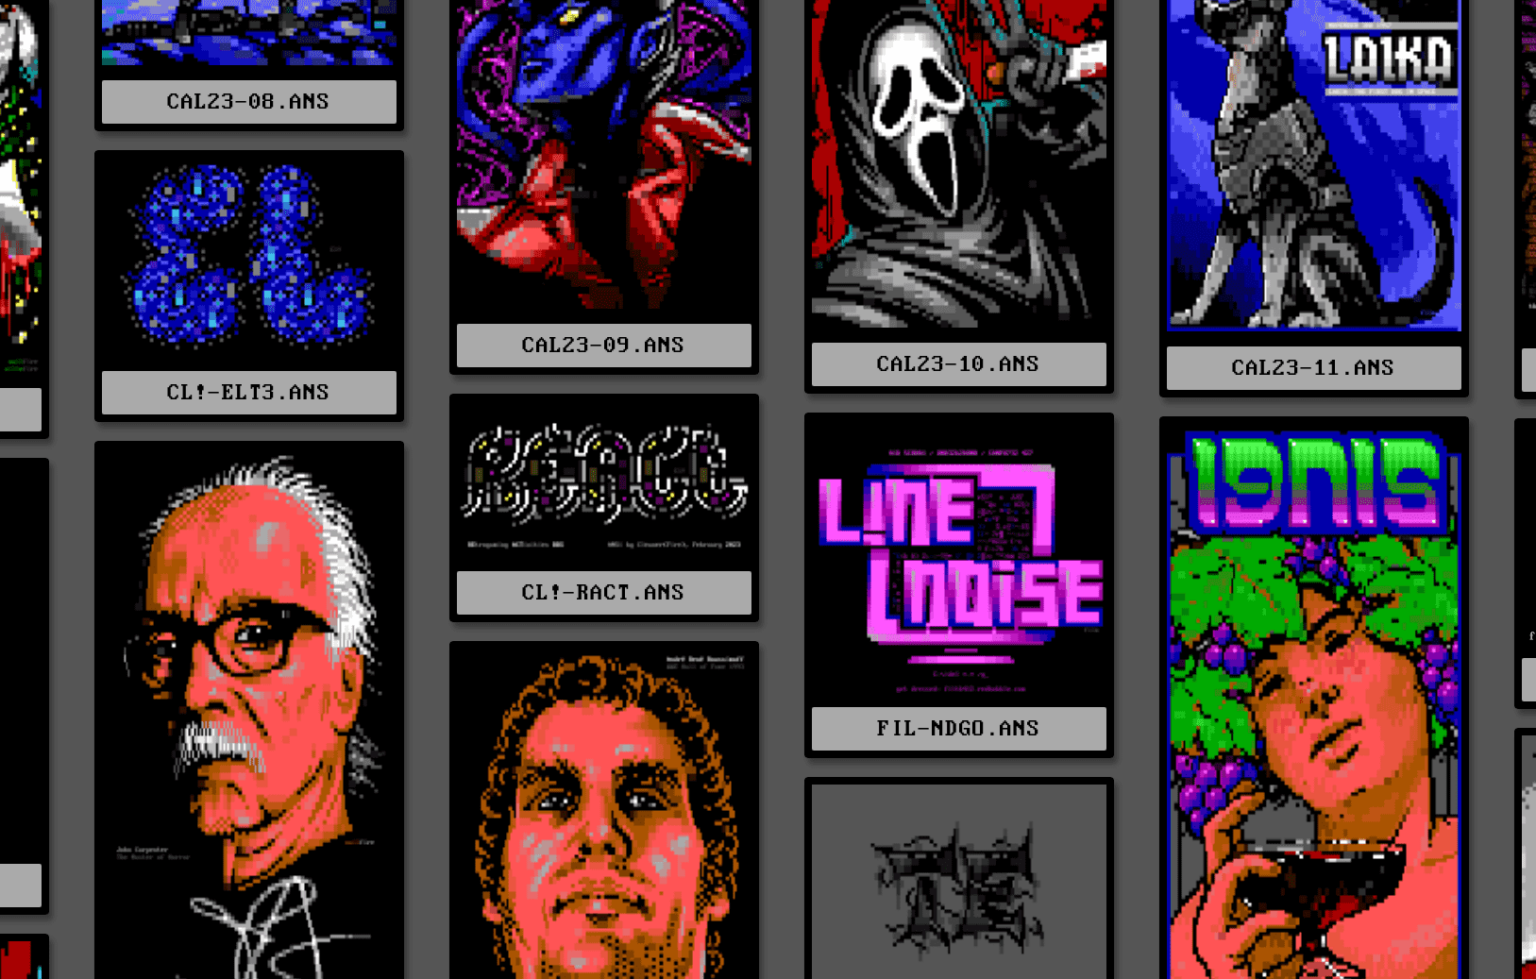 Check out this cool ANSI/ASCII art Archive